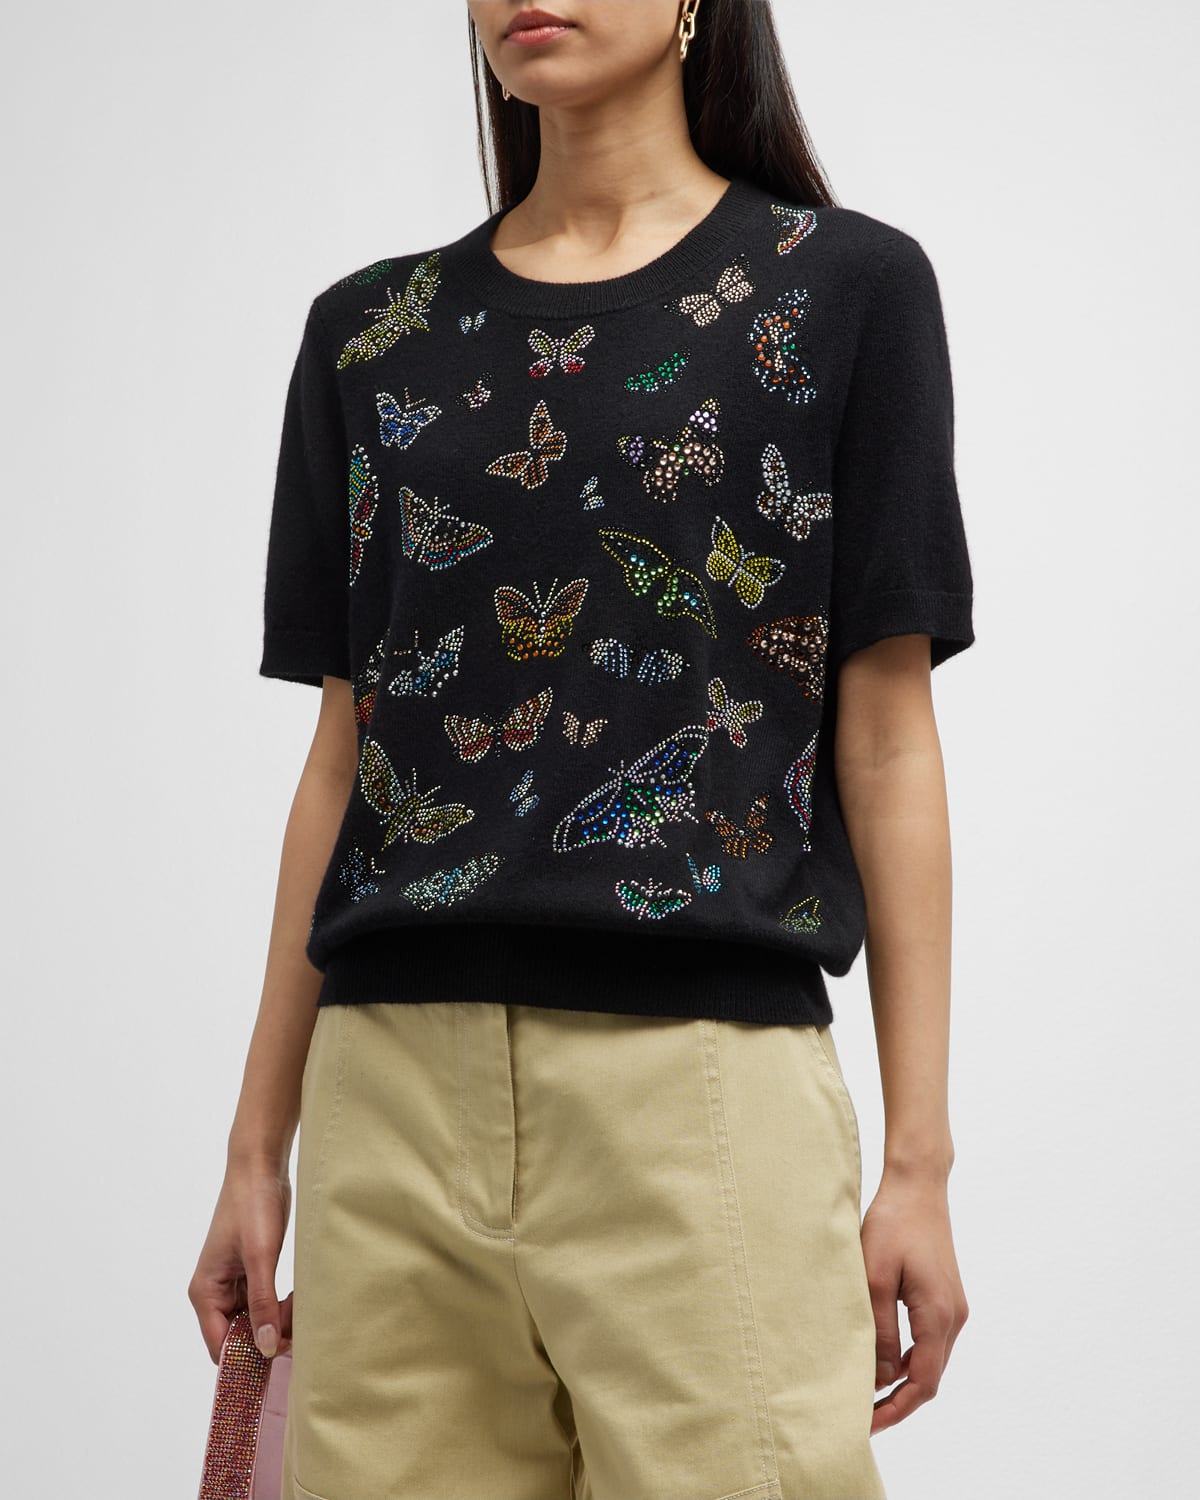 LIBERTINE MILLIONS OF BUTTERFLIES CASHMERE SWEATER WITH CRYSTAL DETAIL